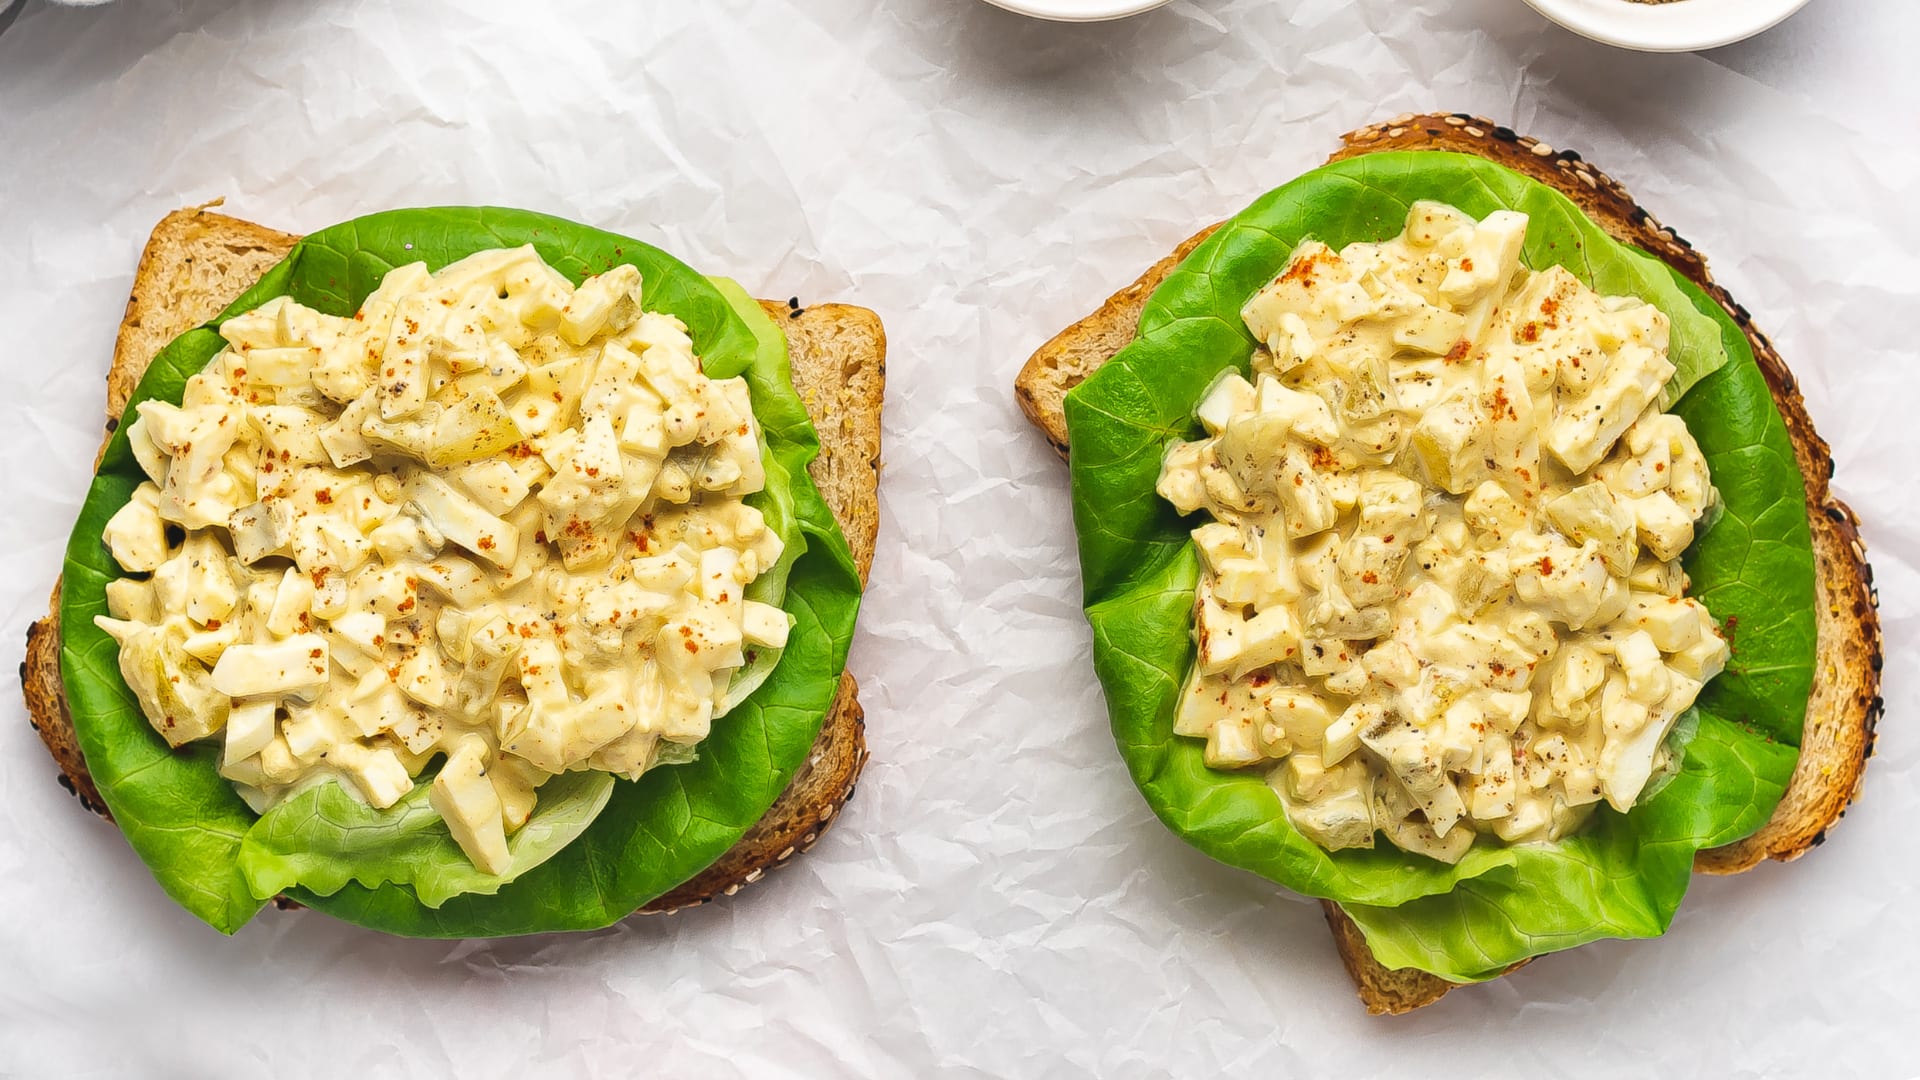 Best Egg Salad Recipe {For Sandwiches} - Shugary Sweets